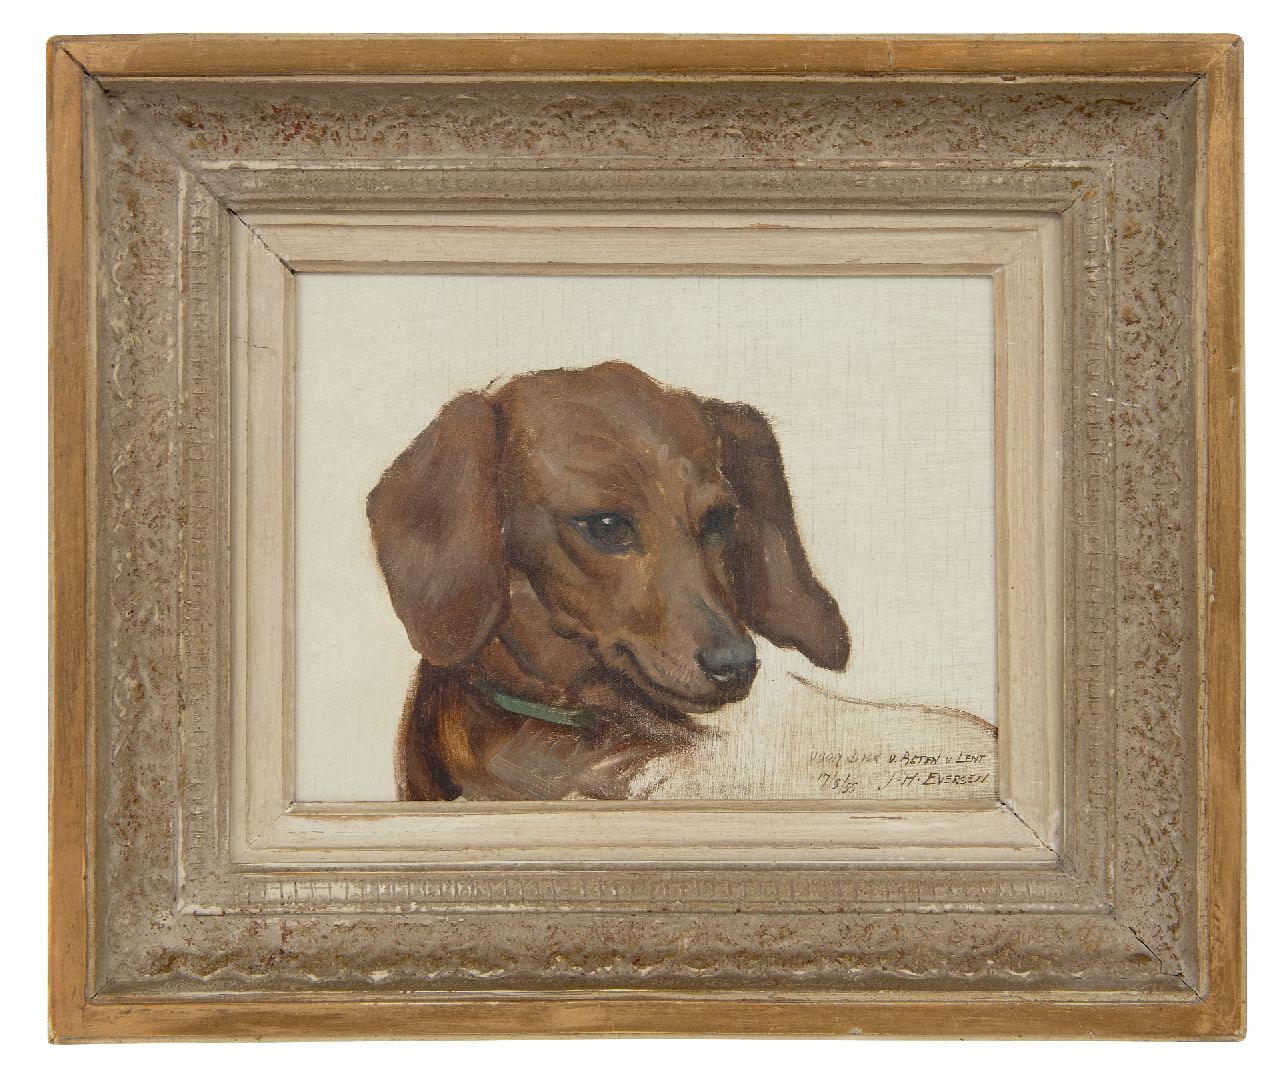 Eversen J.H.  | Johannes Hendrik 'Jan' Eversen | Paintings offered for sale | Portrait of a Dachshund, oil on panel 17.9 x 23.9 cm, signed l.r. and dated 17/5/55